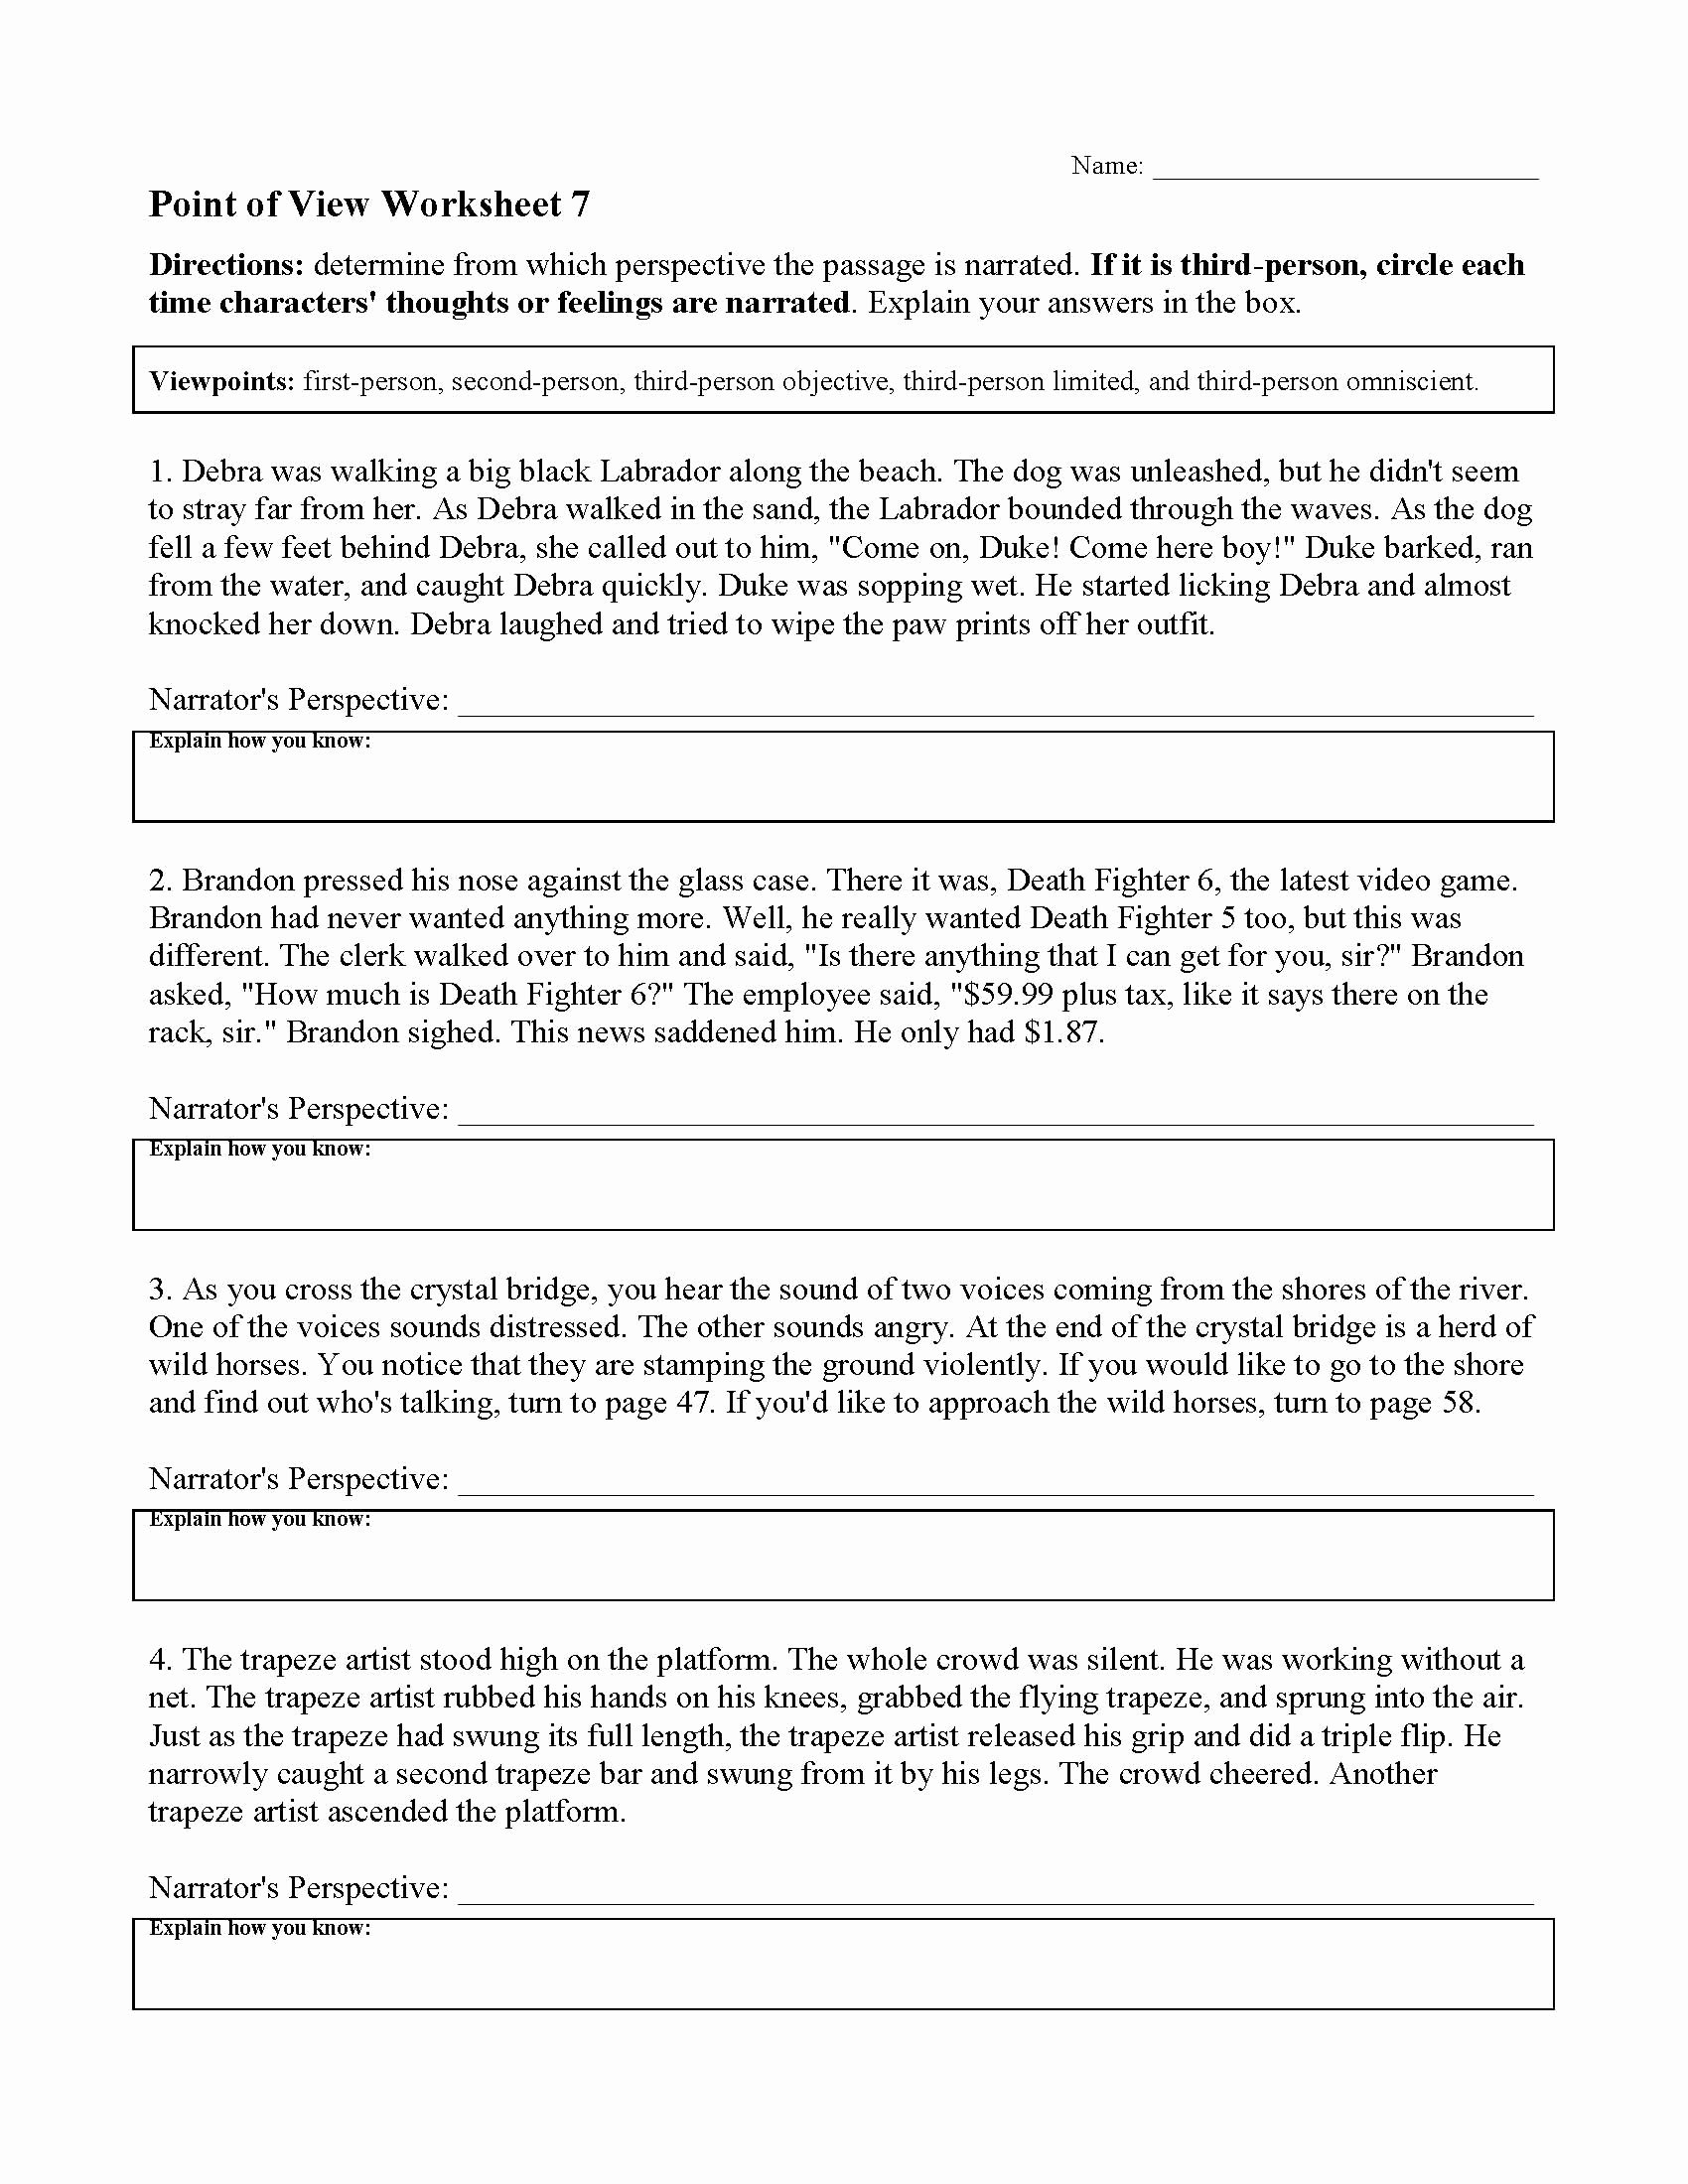 Point Of View Worksheet Unique Point Of View Worksheet 7